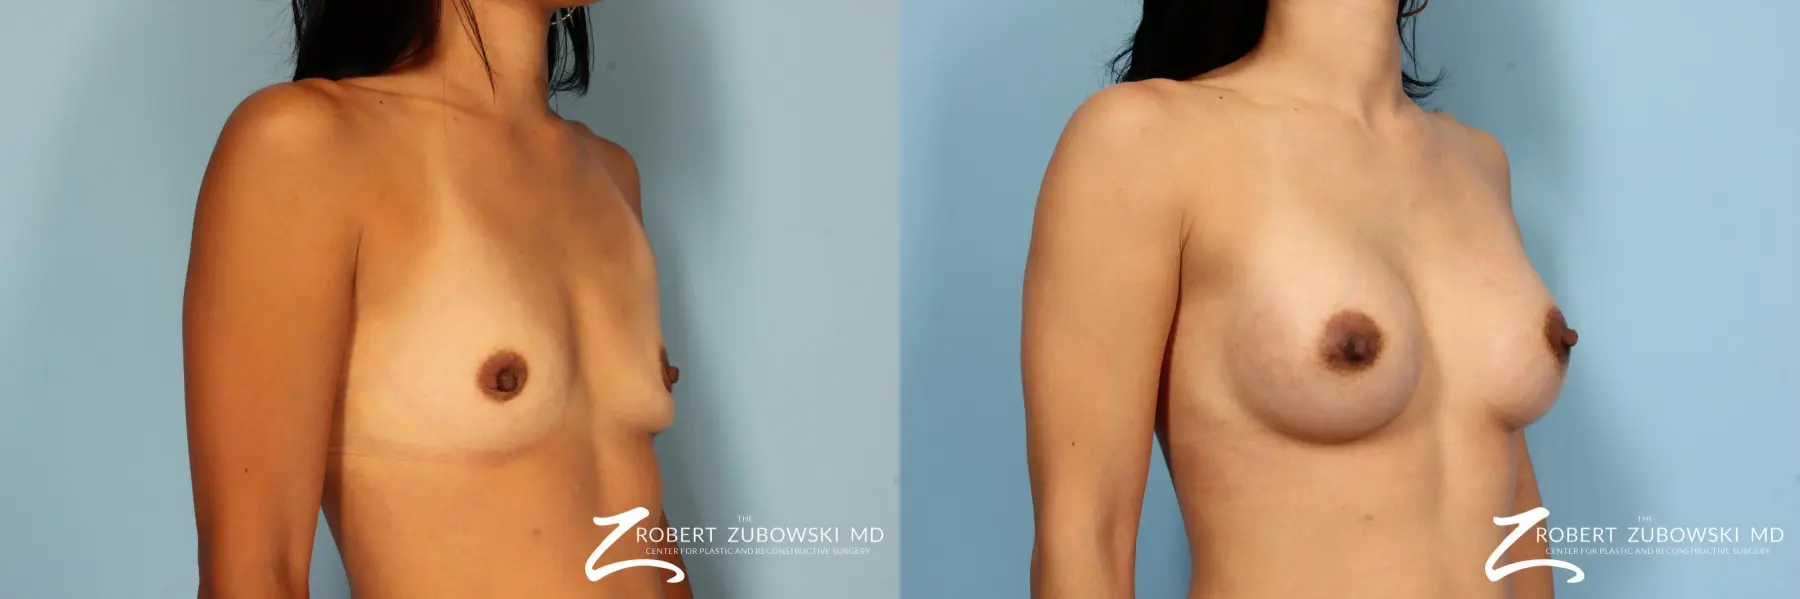 Breast Augmentation: Patient 2 - Before and After 3